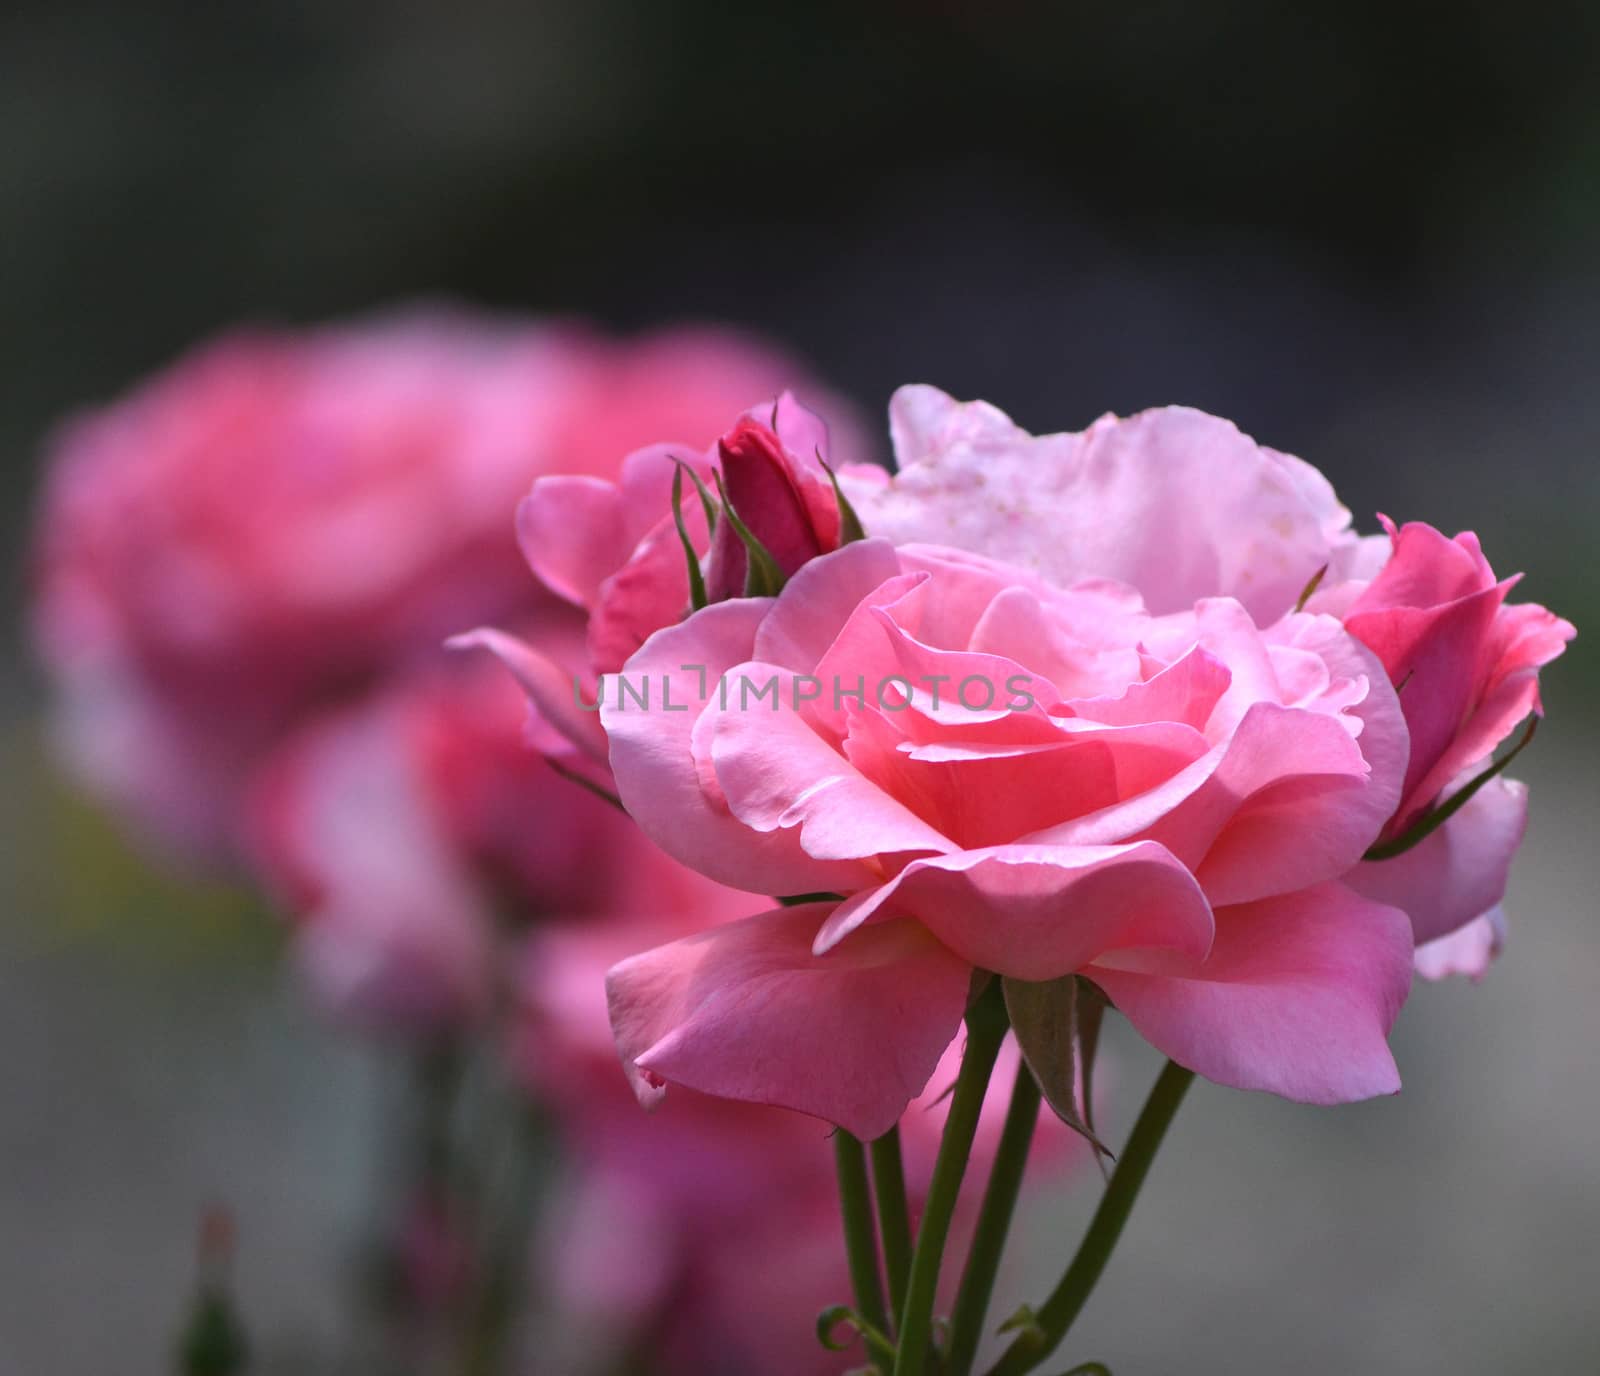 Pink roses in a garden by hibrida13